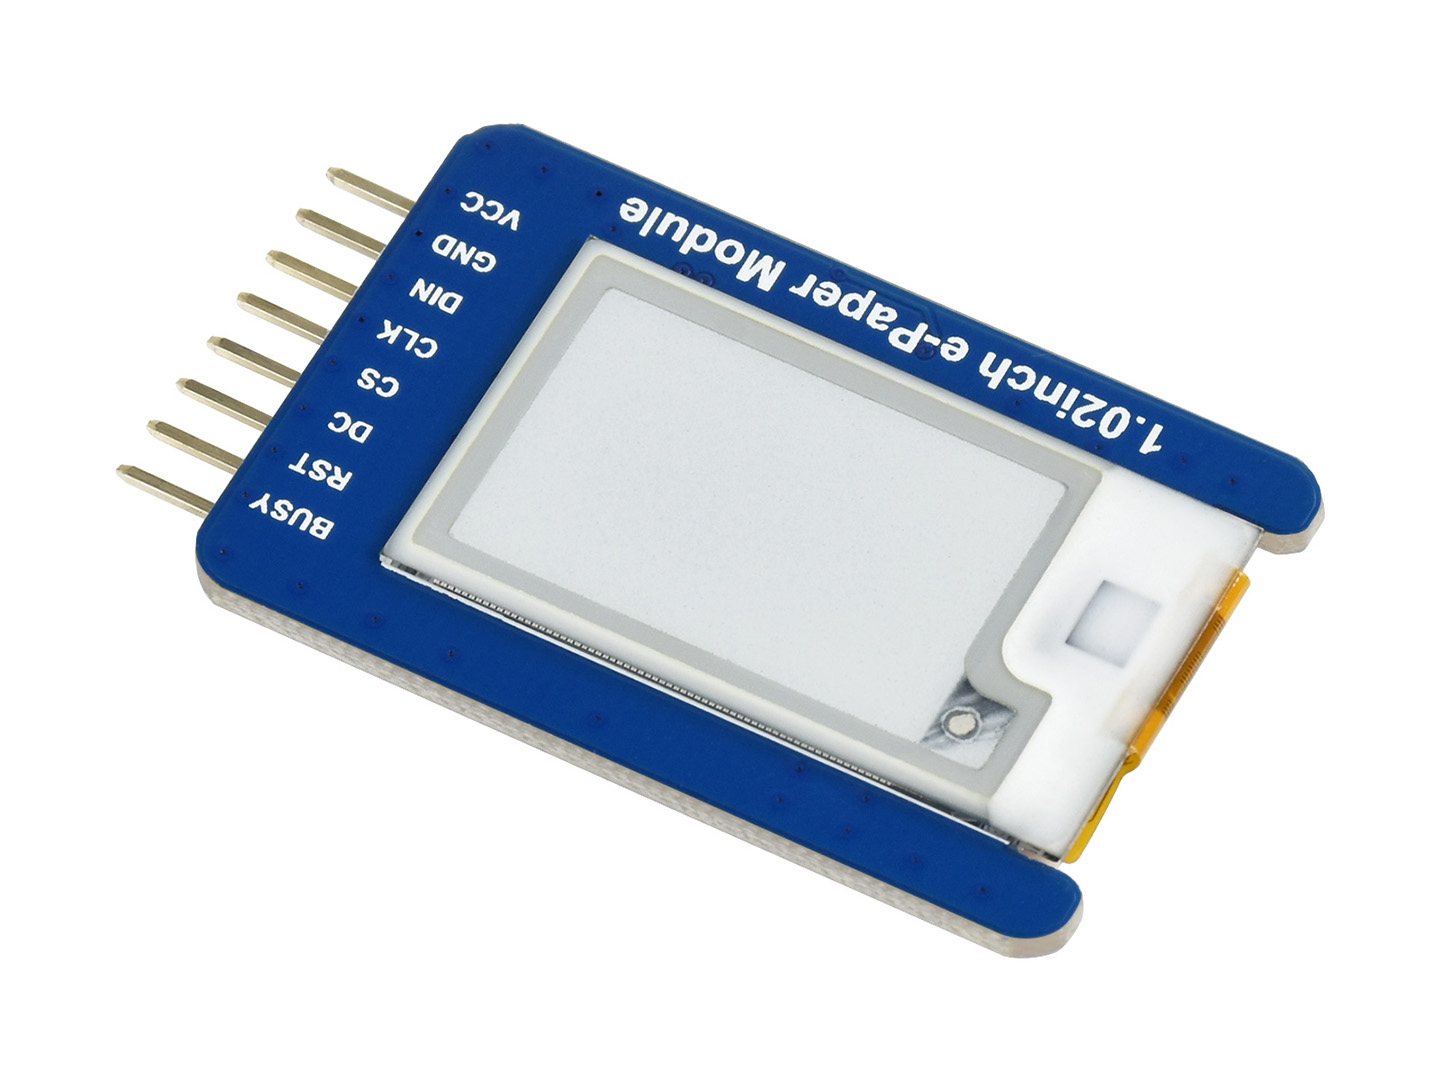 128*80, 1.02inch E-Ink display module, black/white dual-color